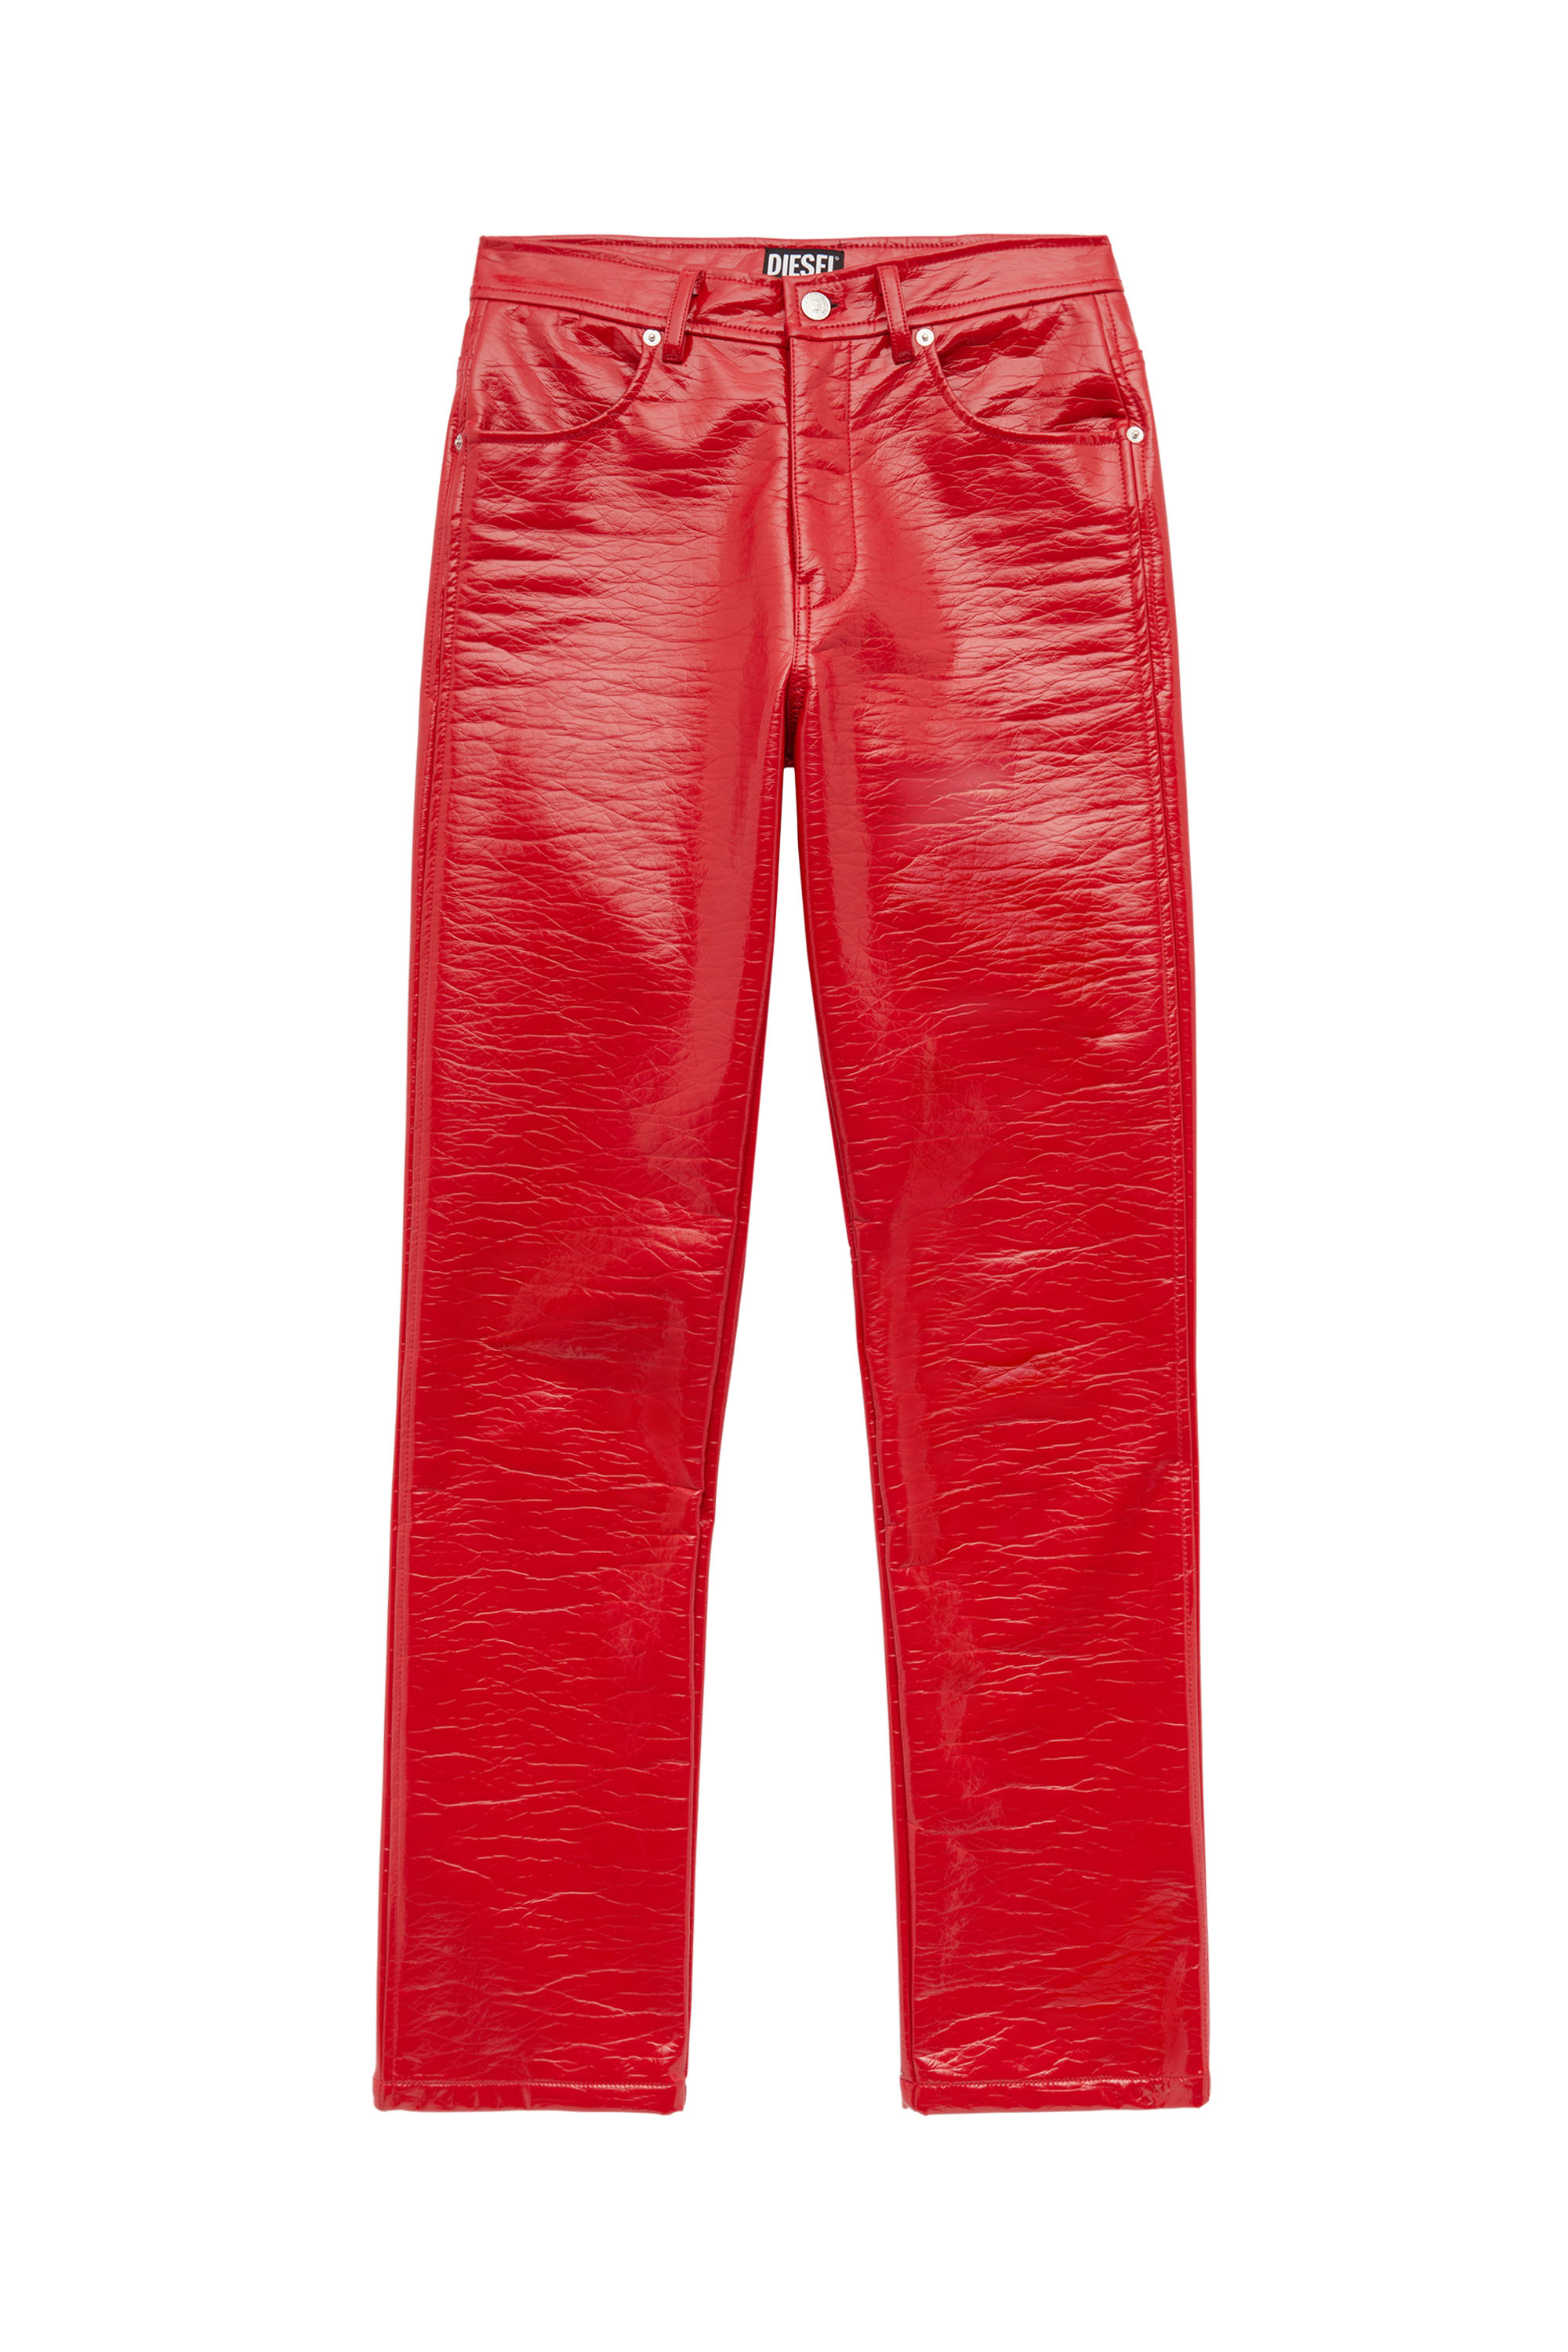 Diesel - P-ARCY, Rosso - Image 1